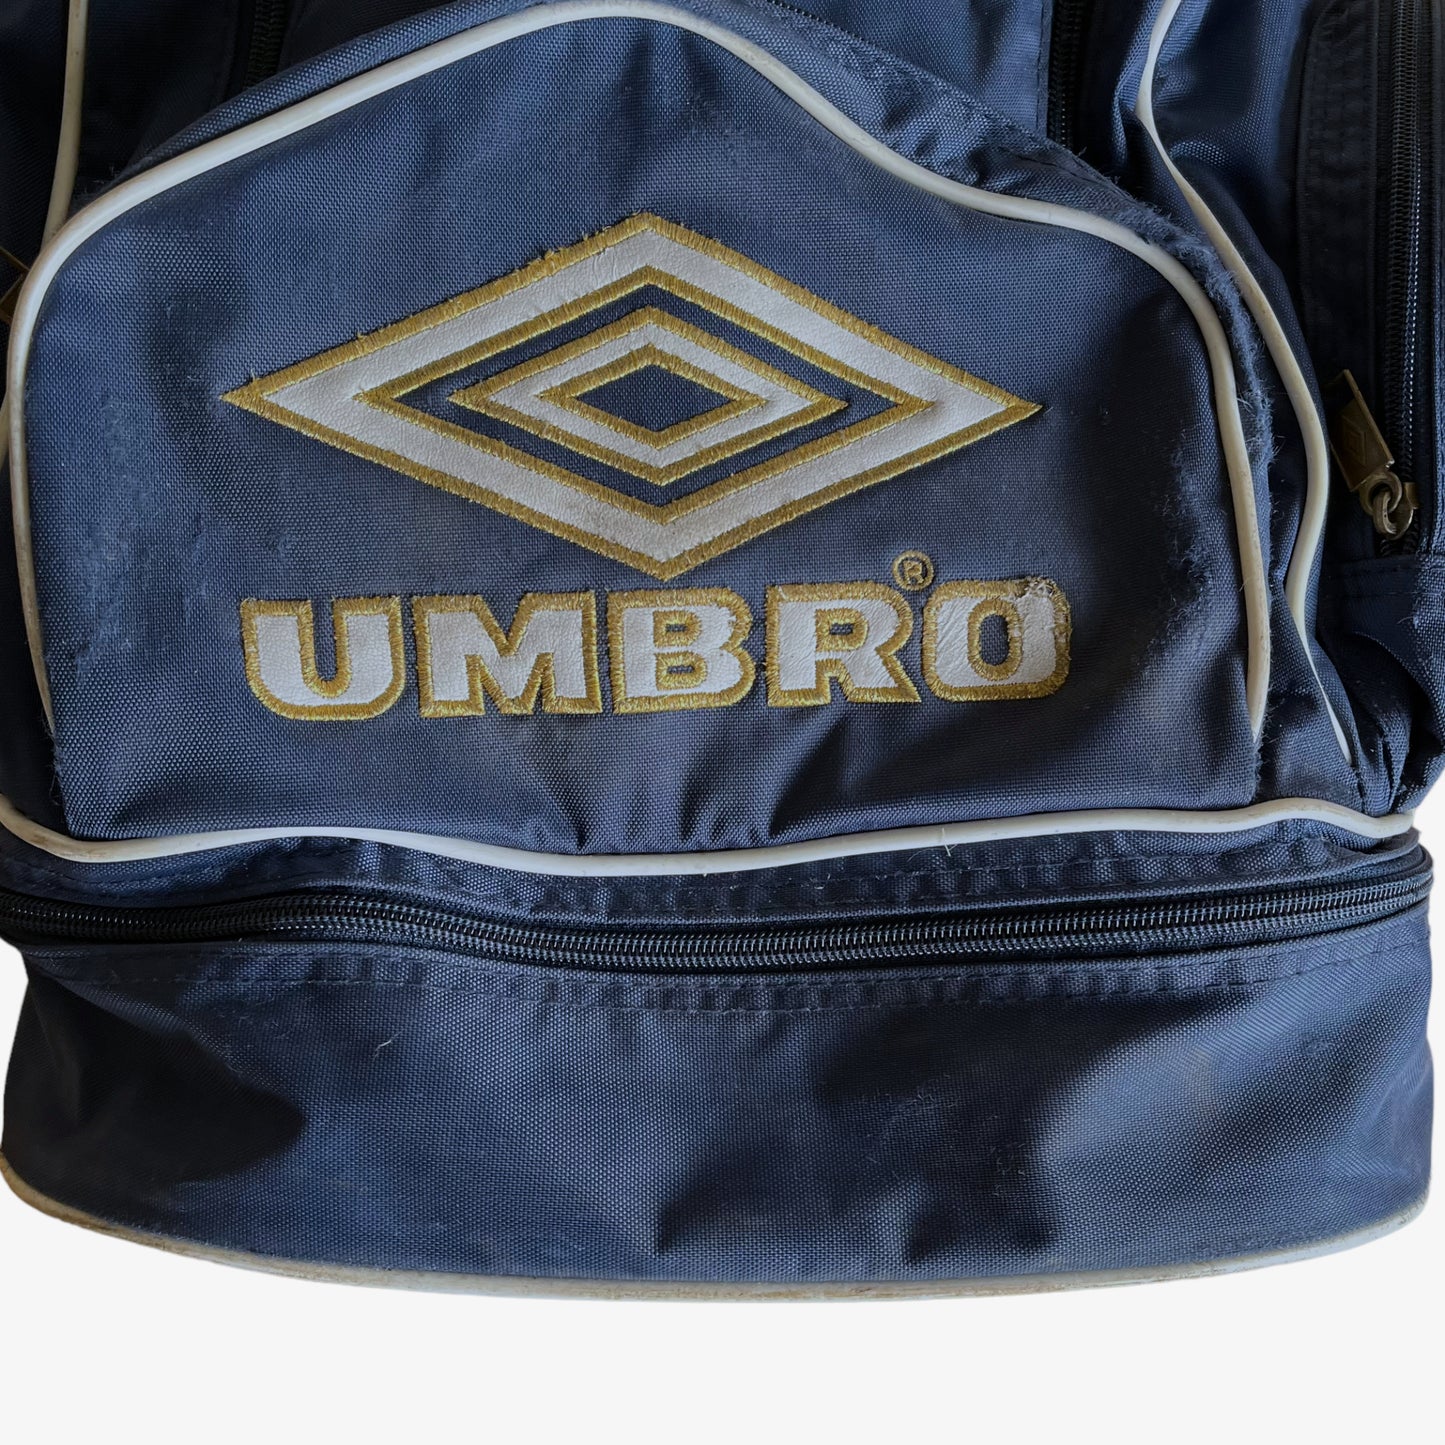 Vintage 90s Umbro Sports Big Blue Backpack Featuring An Embroidered Spell Out Logo Stitched - Casspios Dream